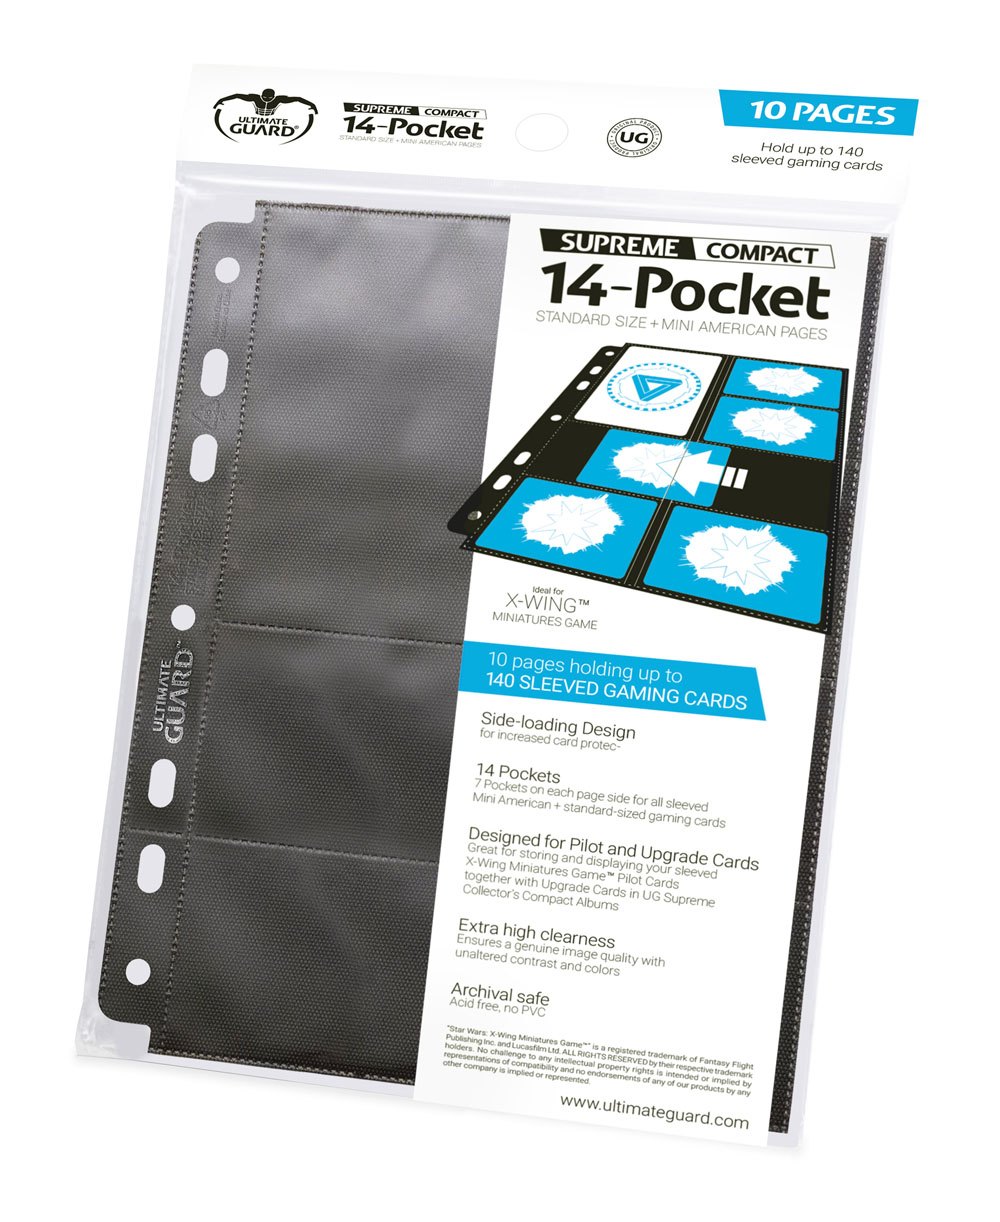 Ultimate Guard 14-Pocket Compact Pages Standard Size a Mini Amer